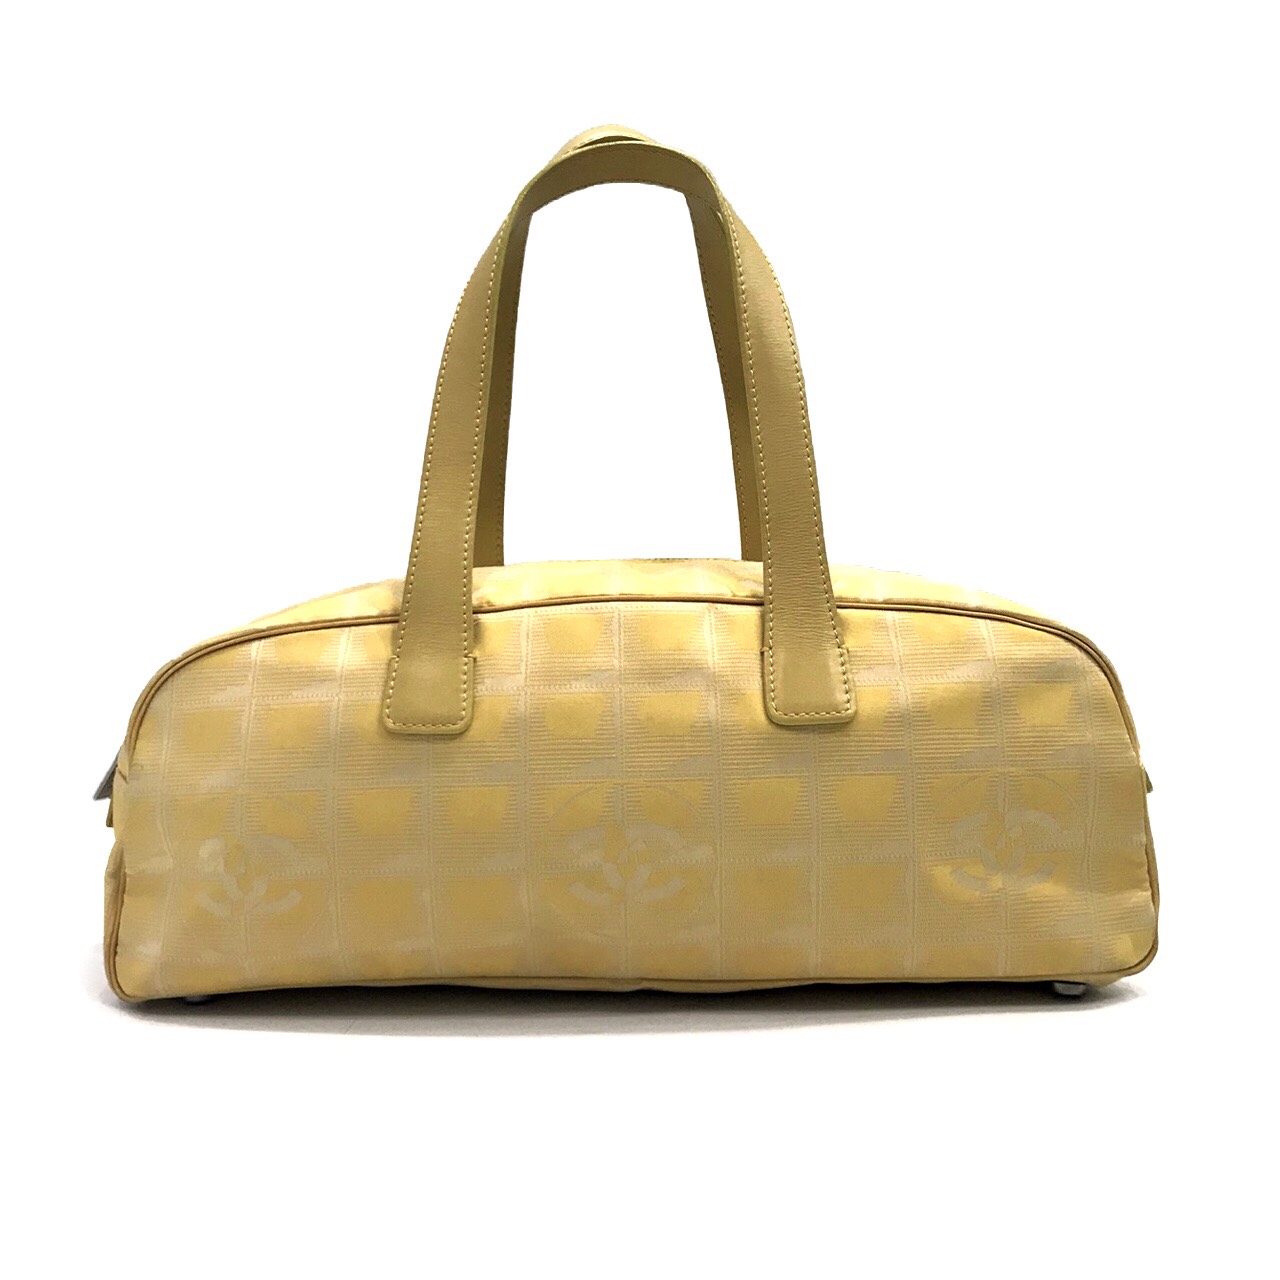 Used Chanel New Travel Vintage Boston Bag in Yellow Fabric GHW ...